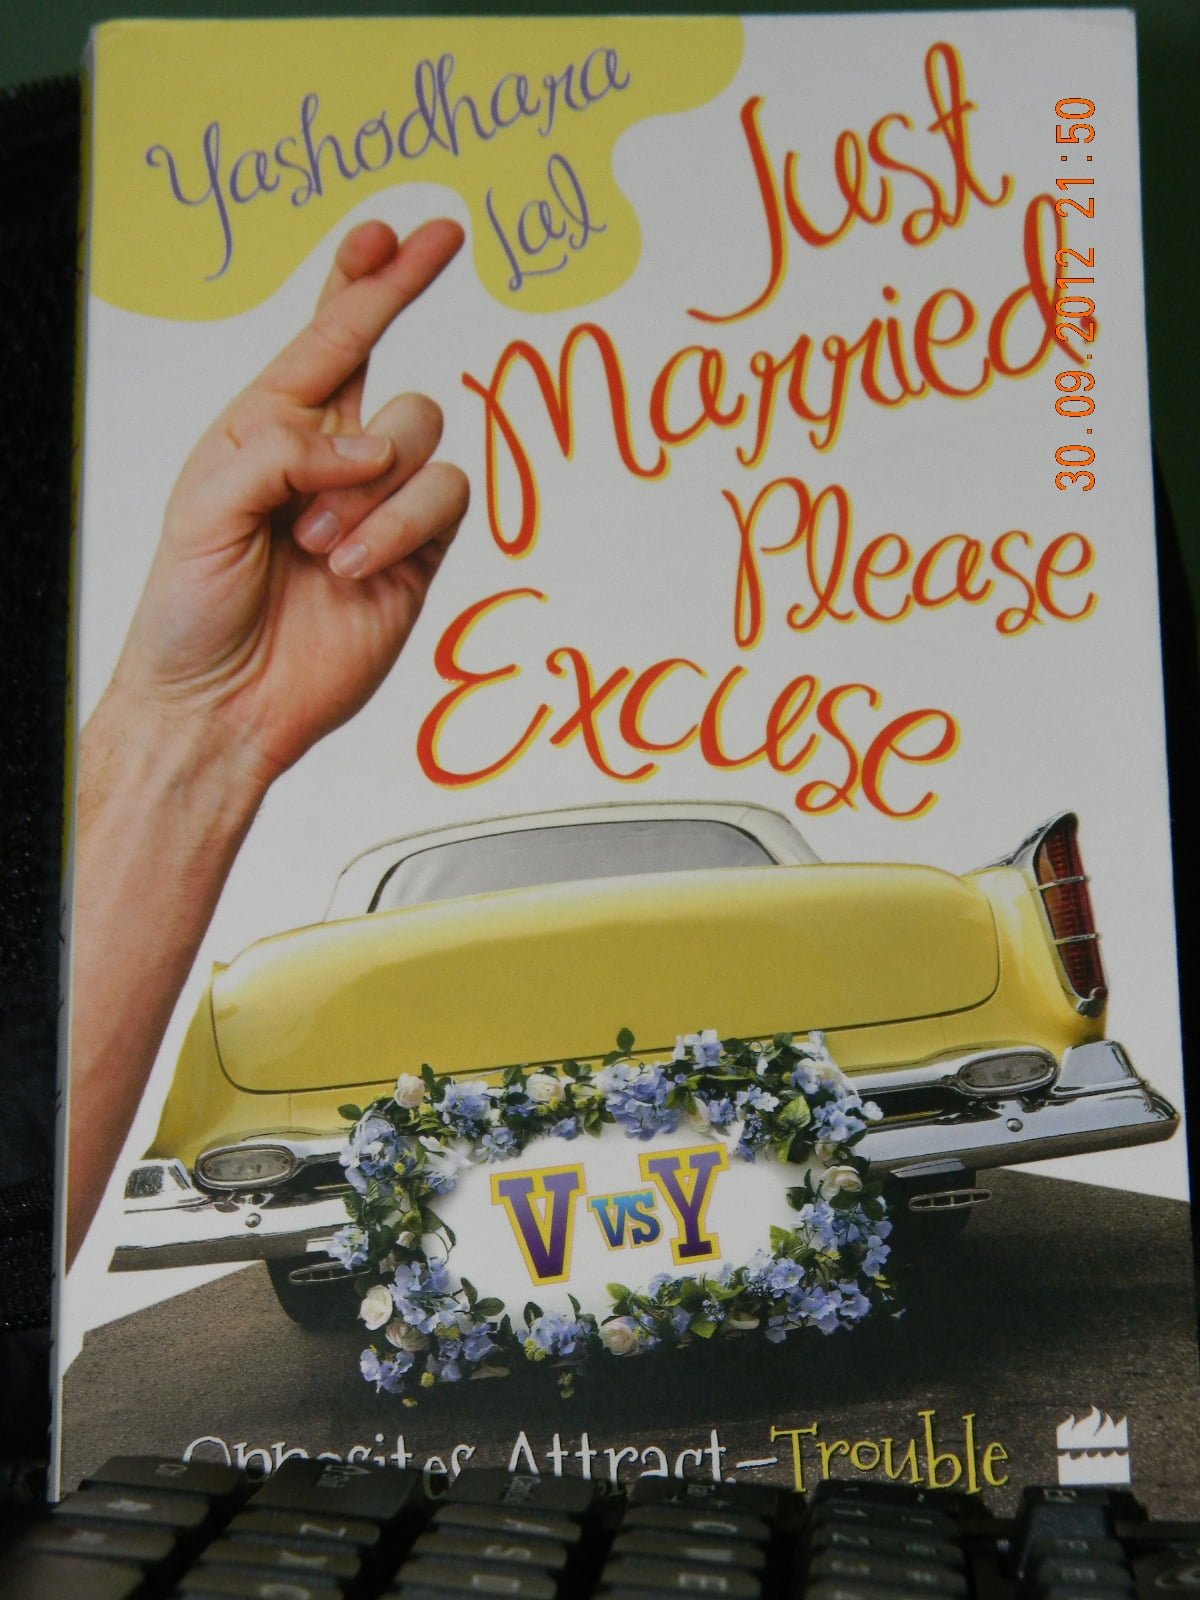 JUST MARRIED PLEASE EXCUSE YASHODHARA LALL